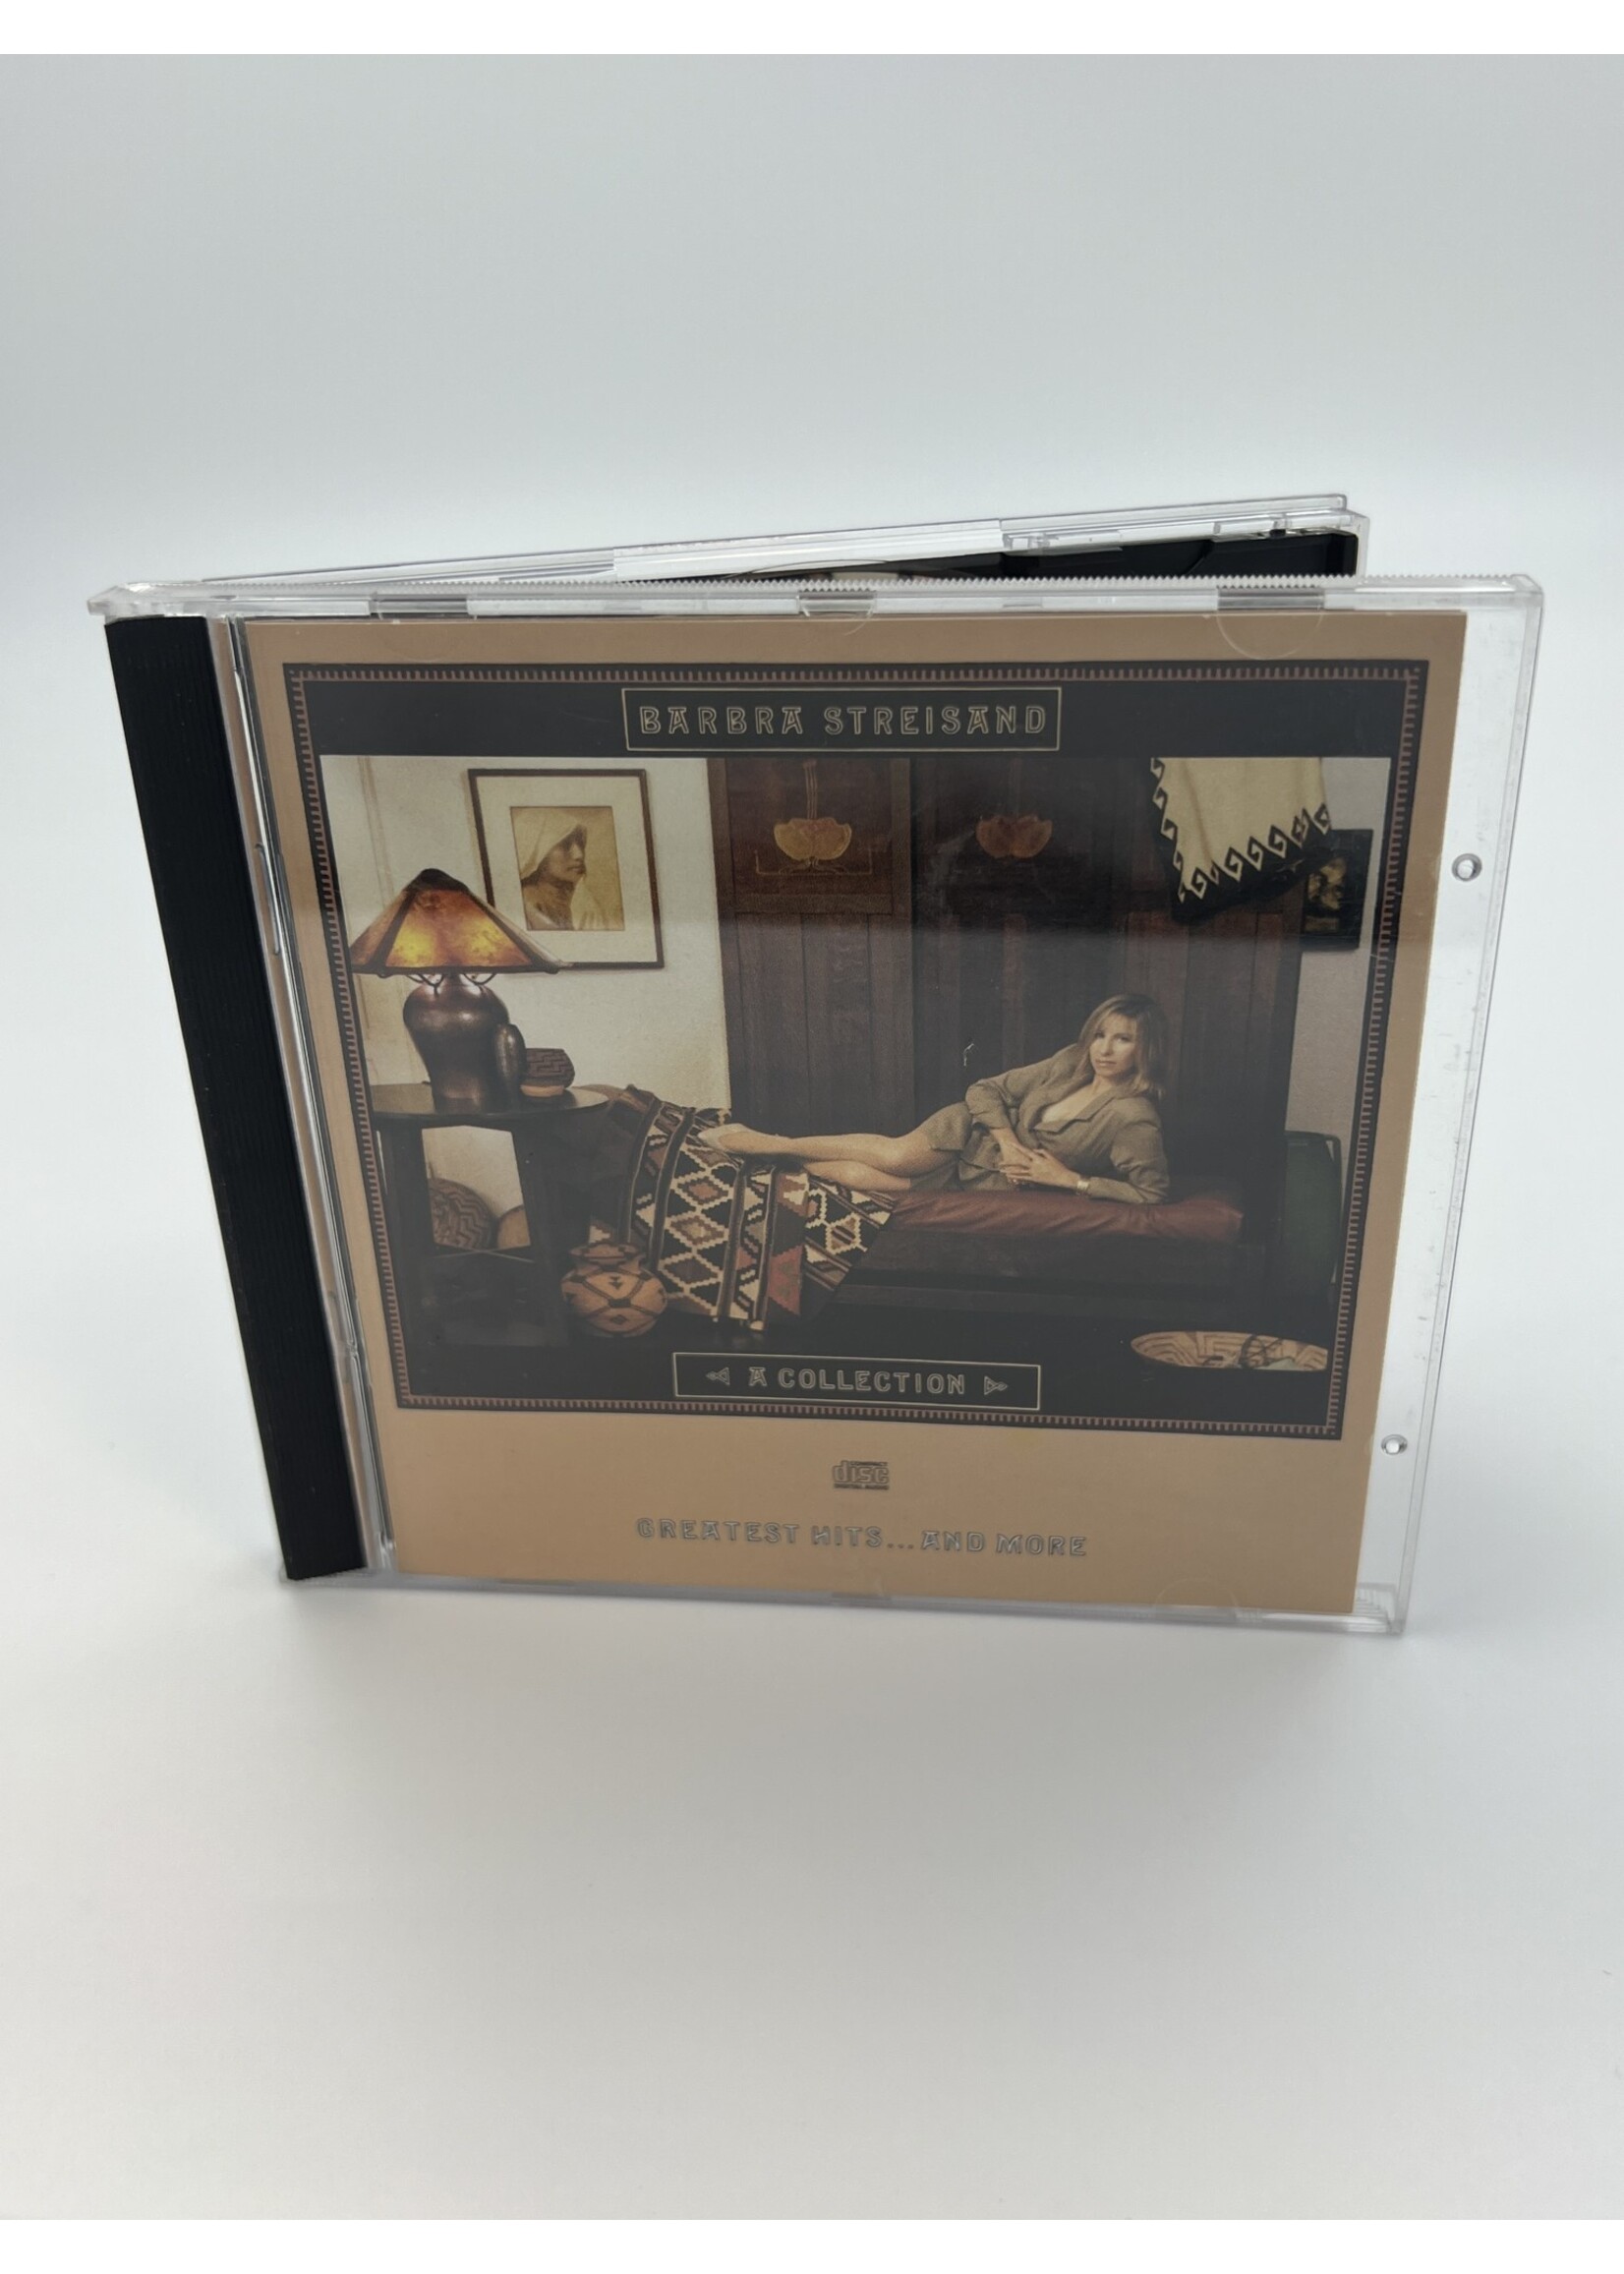 CD Barbara Streisand Greatest Hits A Collection and More CD